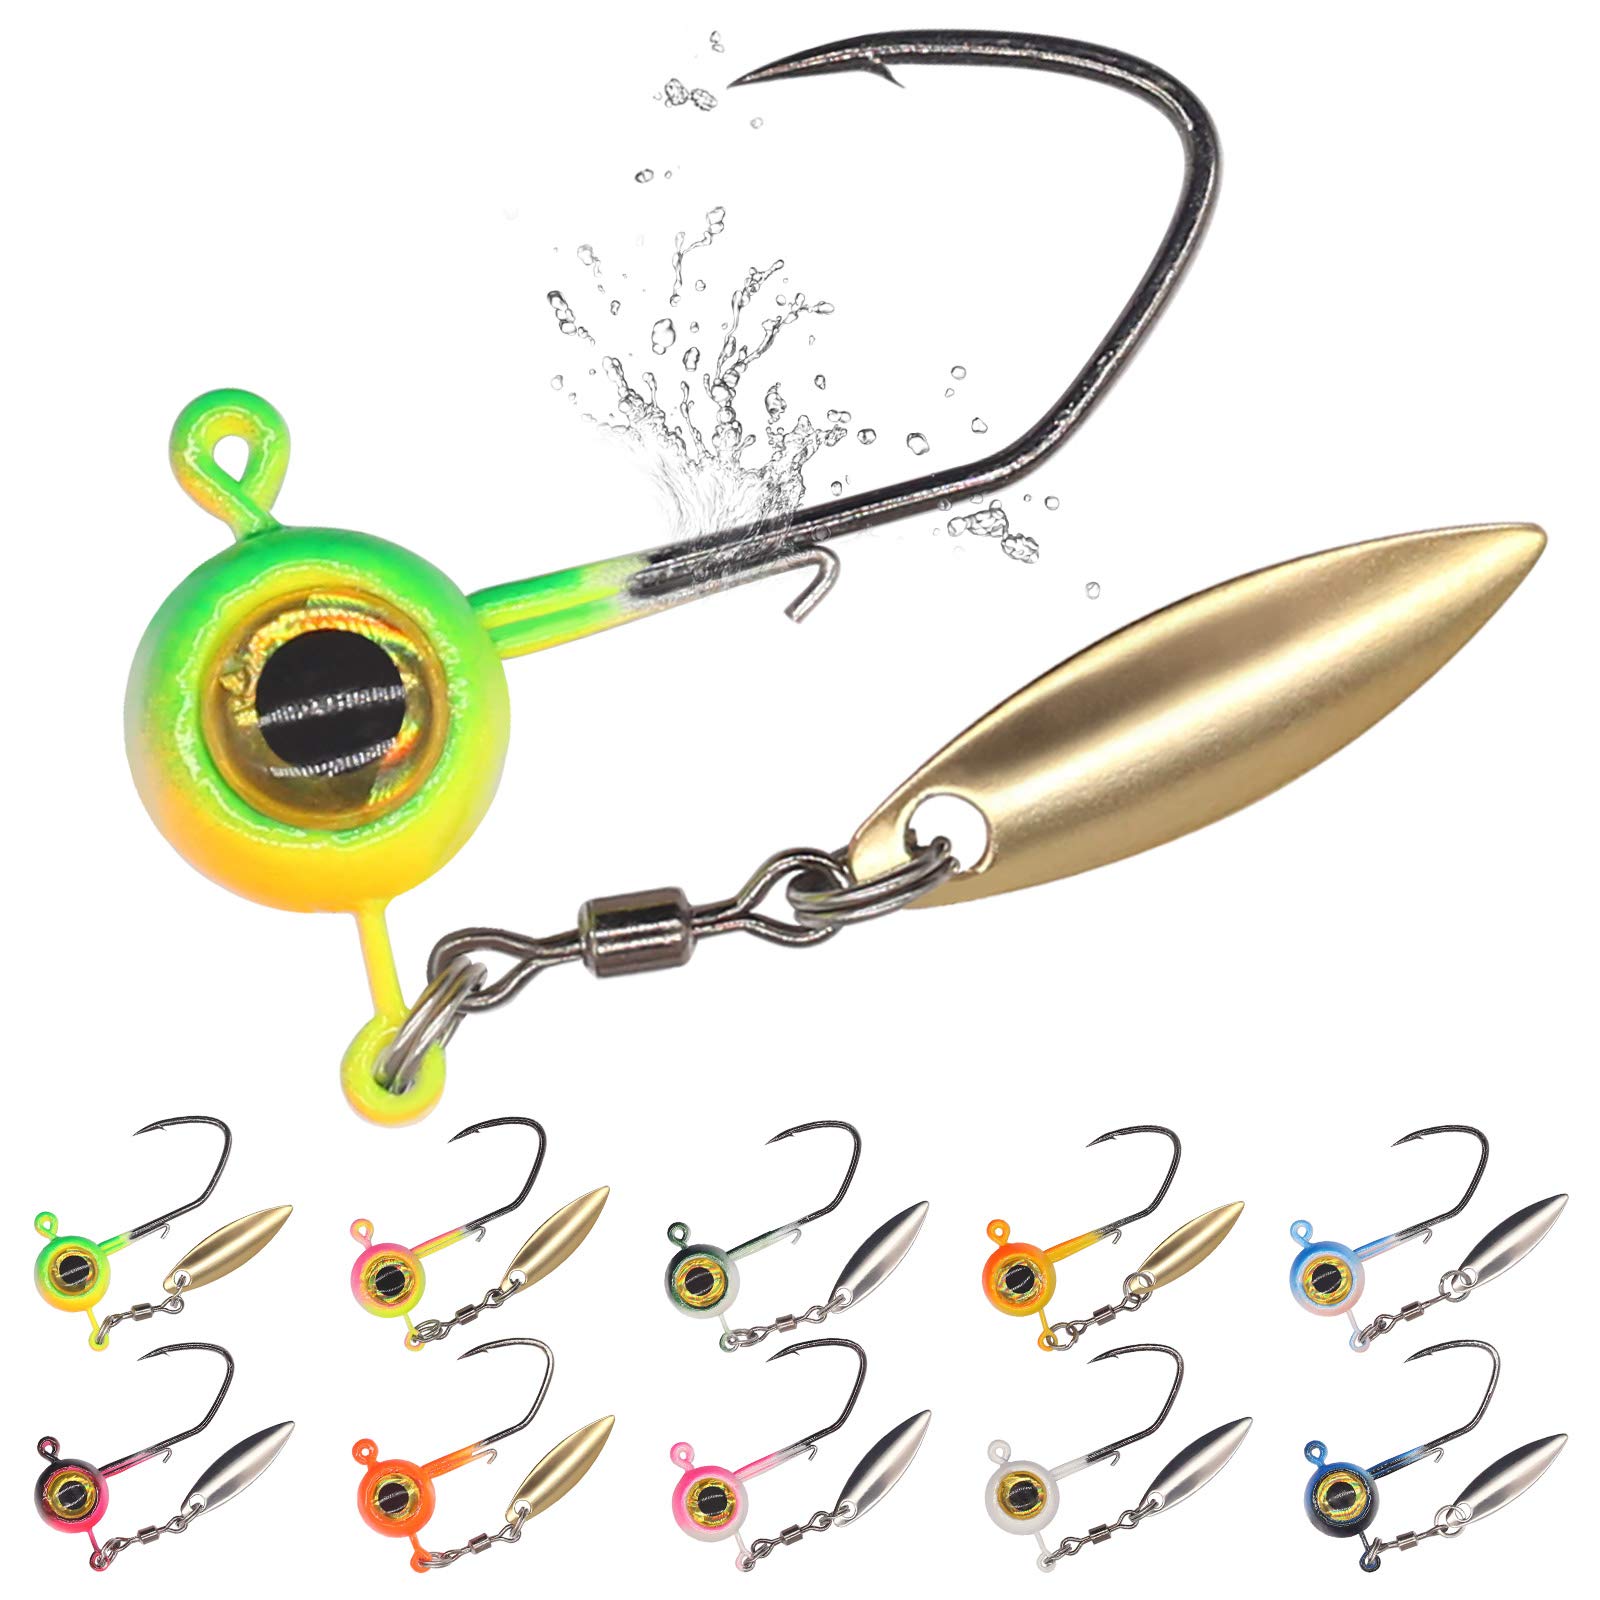 Realtree Fishing's Jig-It Spinner Bait 5/8 Ounce Crappie